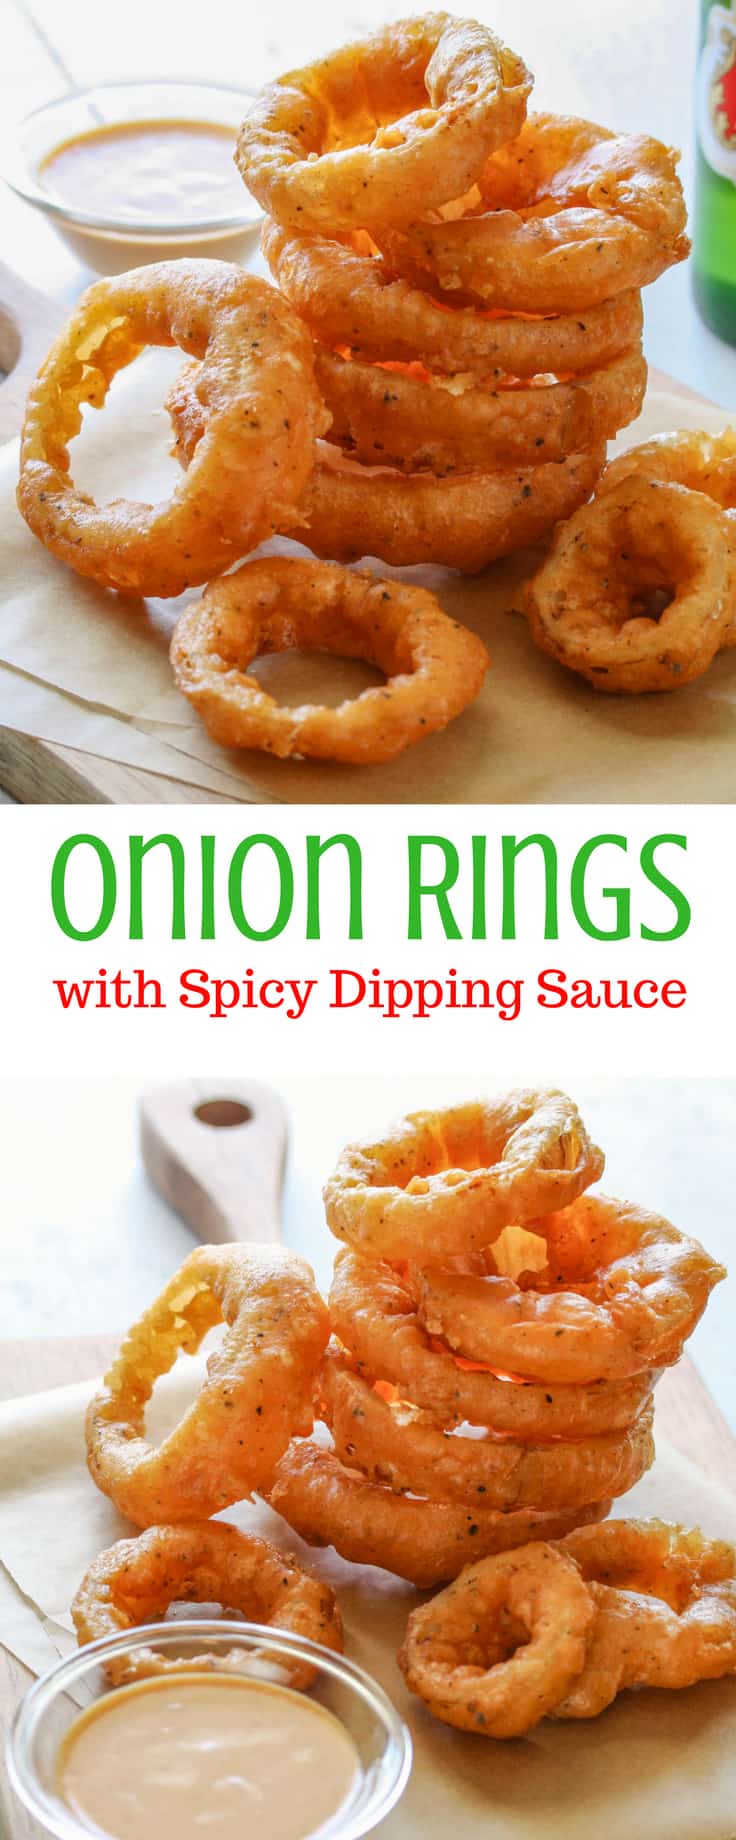 Onion Rings with Spicy Dipping Sauce - a great addition to your game day menu! www.savingdessert.com